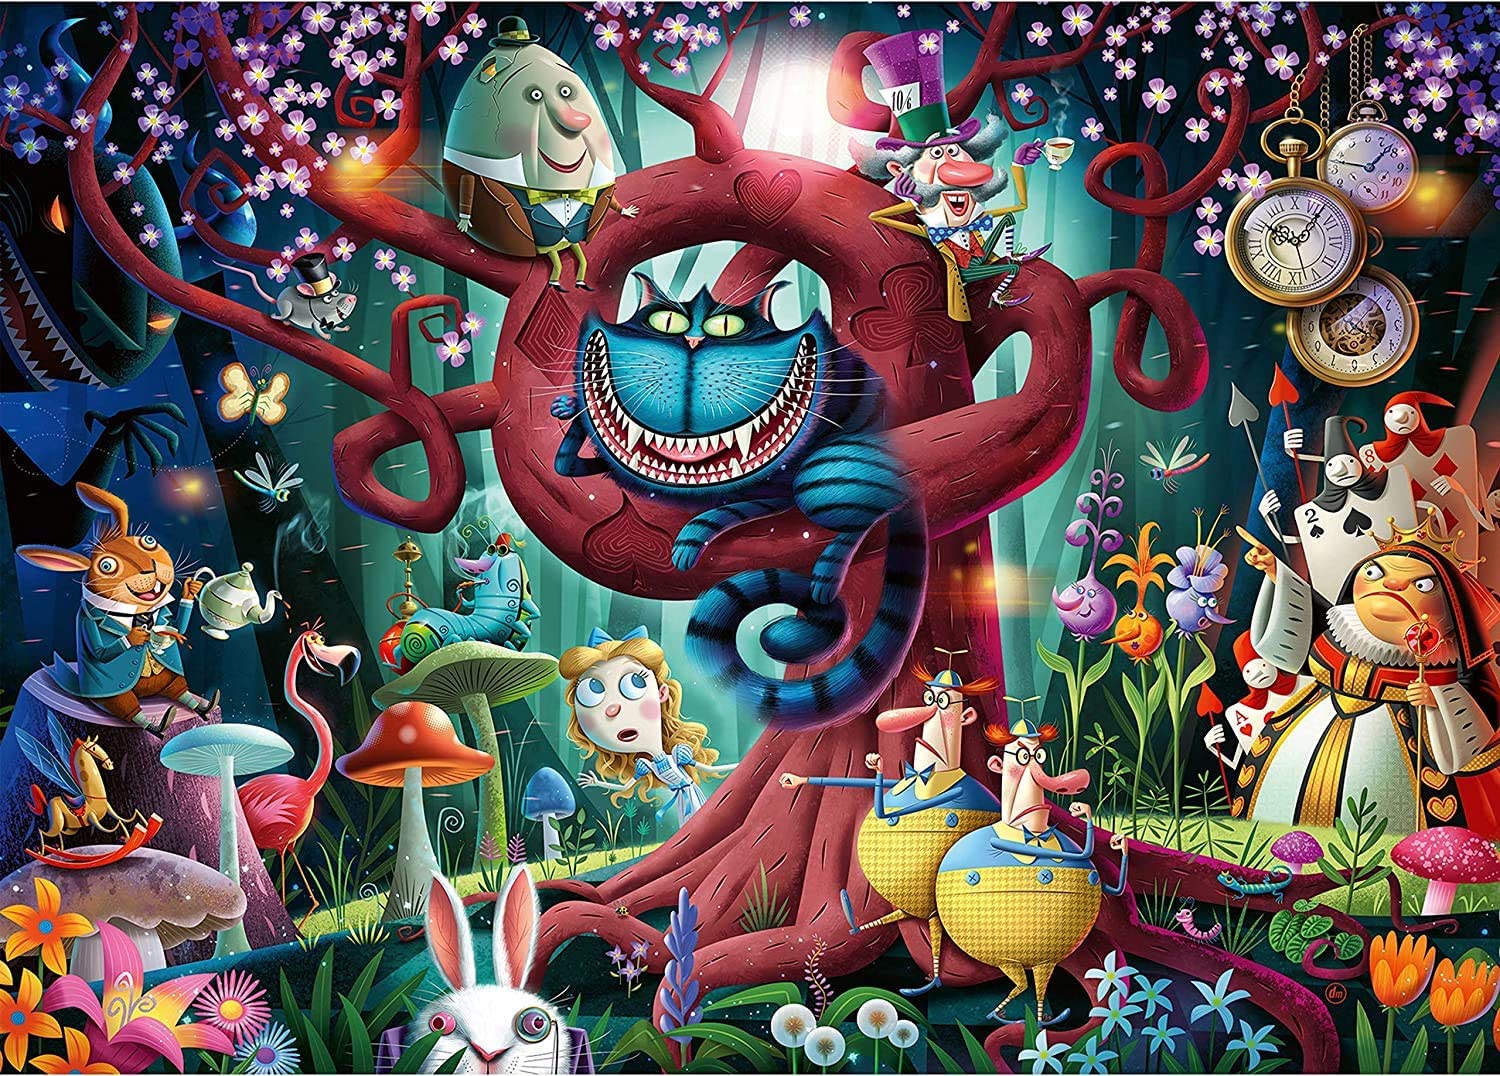 Puzzle We Are All Mad Alice in Wonderland 1.000 pcs 2